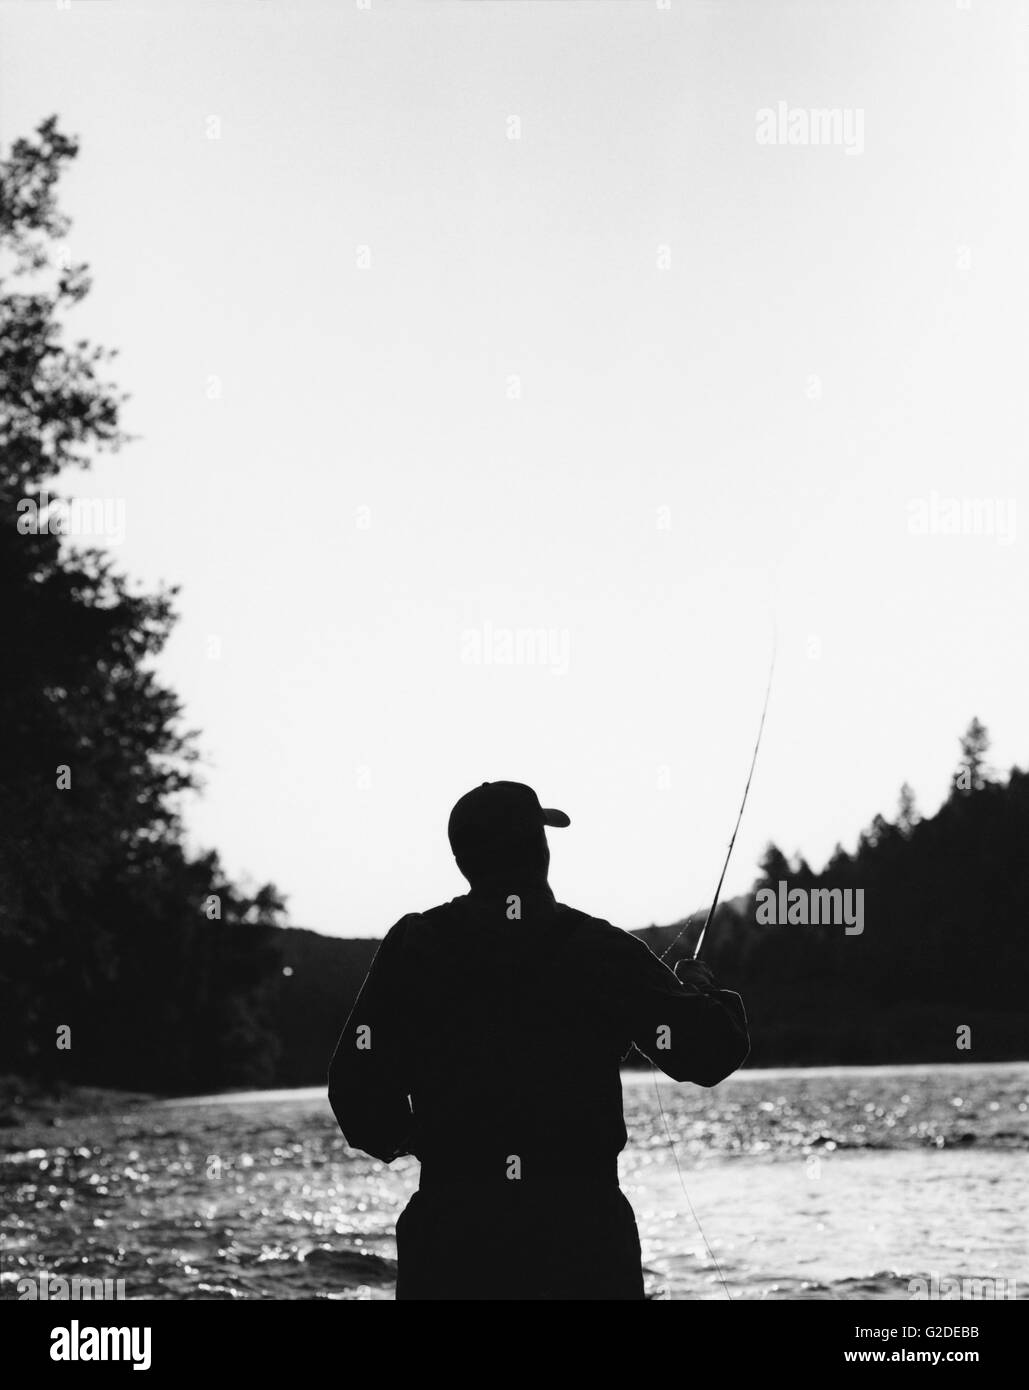 Fly fisherman Black and White Stock Photos & Images - Alamy